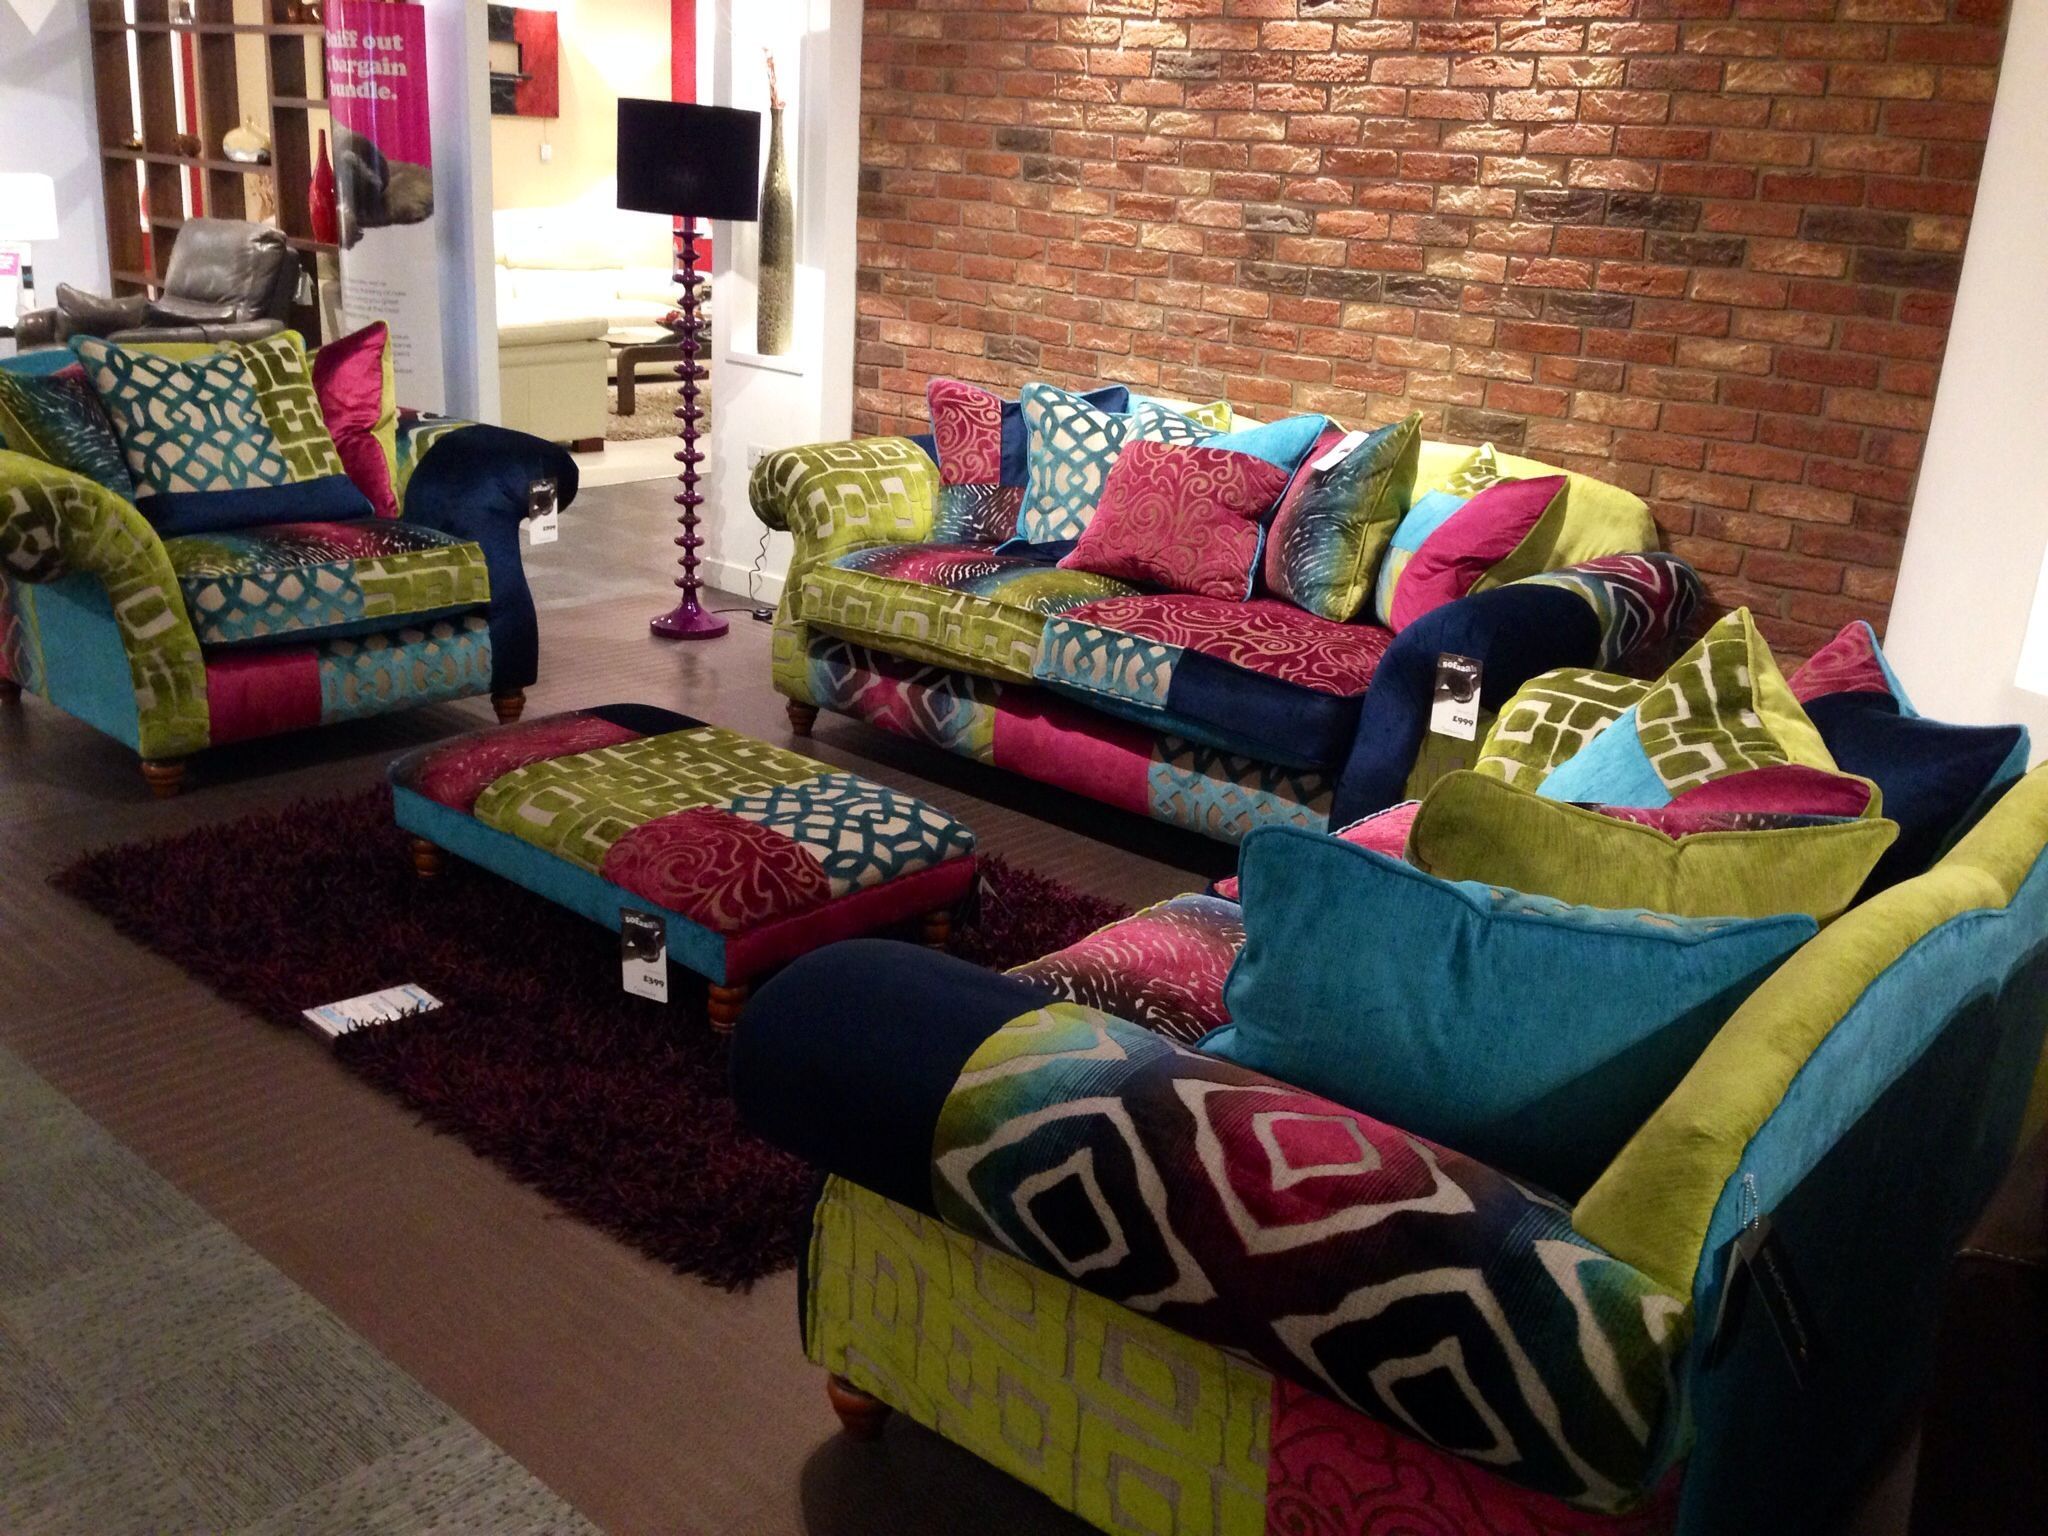 7 Images Multi Coloured Sofas And Review – Alqu Blog Within Sofas In Multiple Colors (Gallery 4 of 20)